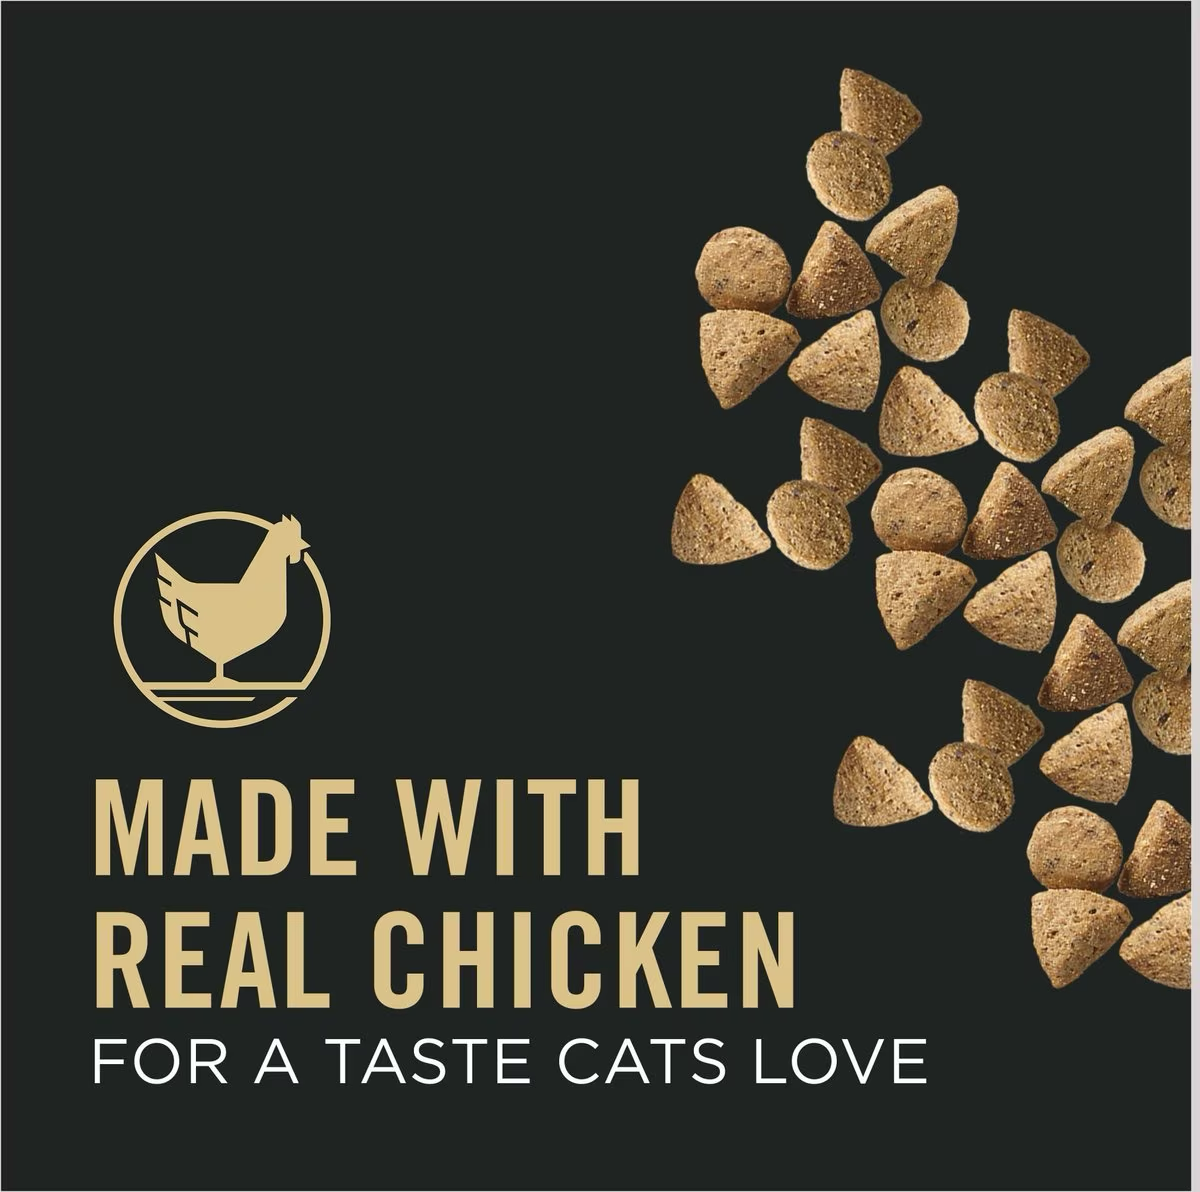 Purina Pro Plan Vital Systems Chicken & Egg Formula 4-in-1 Dry Cat Food  Cat Food  | PetMax Canada